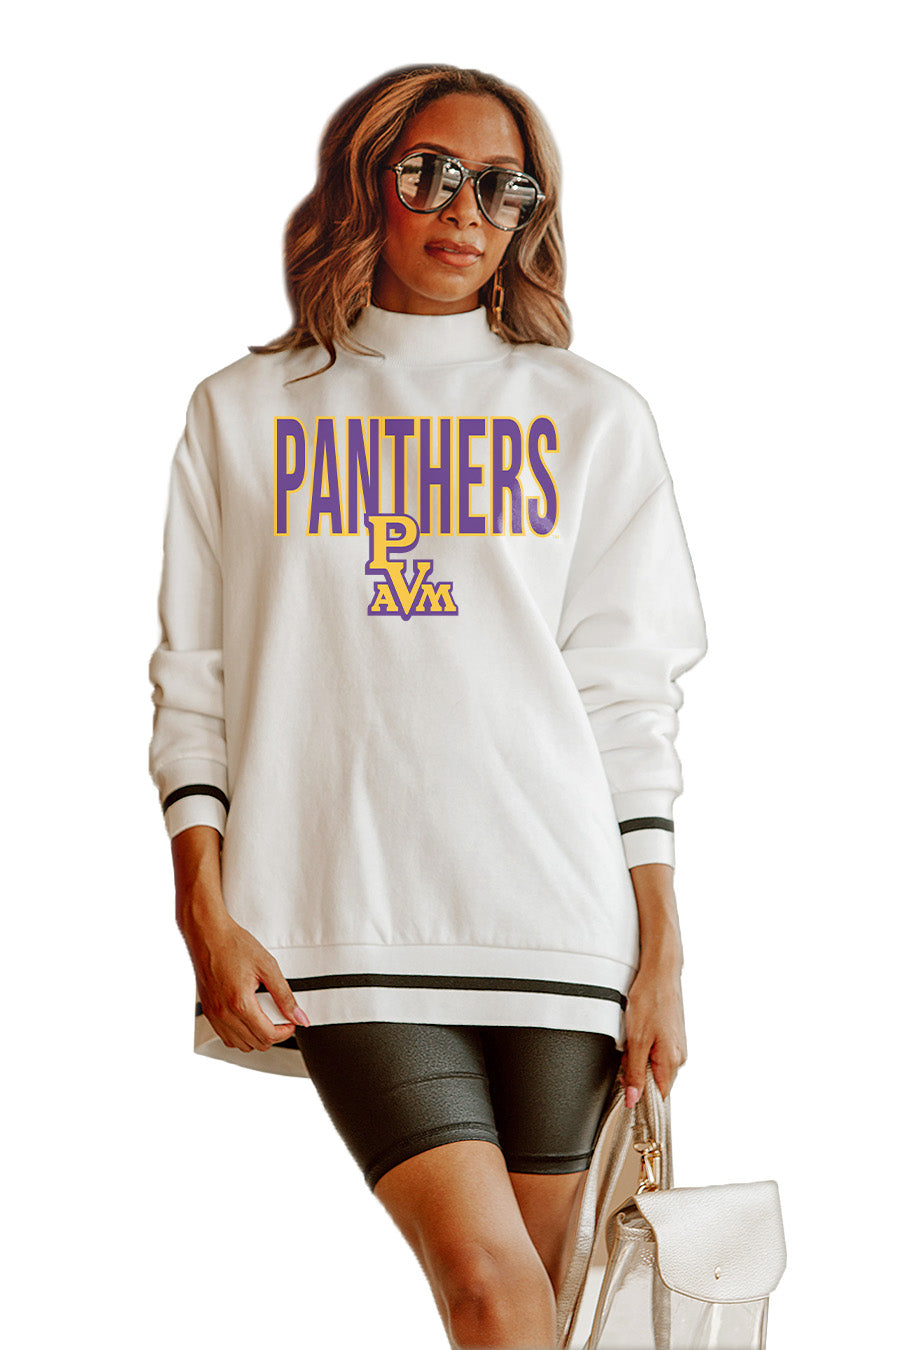 PRAIRIE VIEW A&M PANTHERS STYLE FORCE MOCK PULLOVER